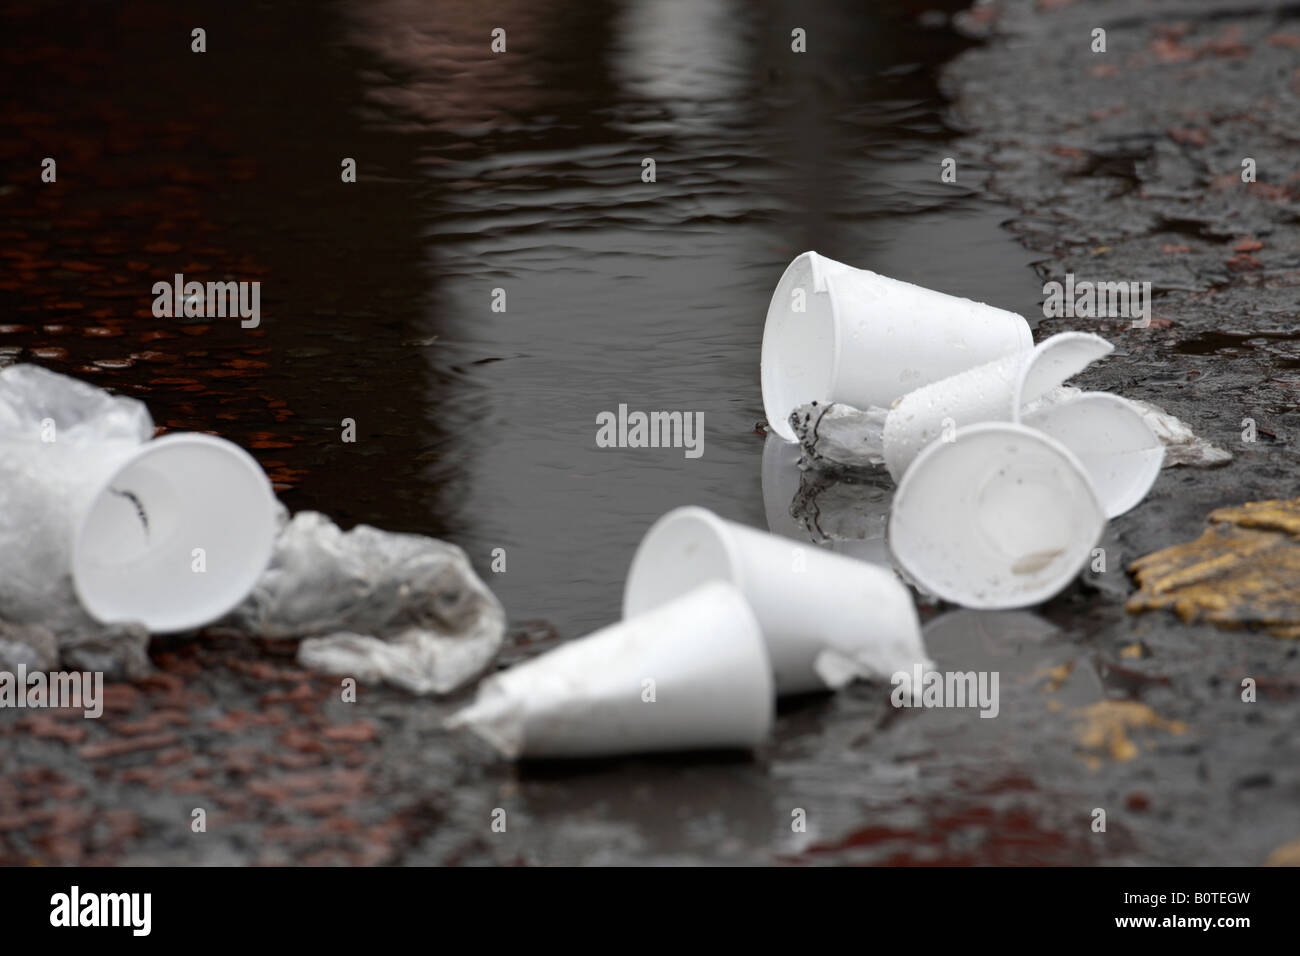 discarded polystyrene styrofoam cups lying by a puddle in the road Stock Photo